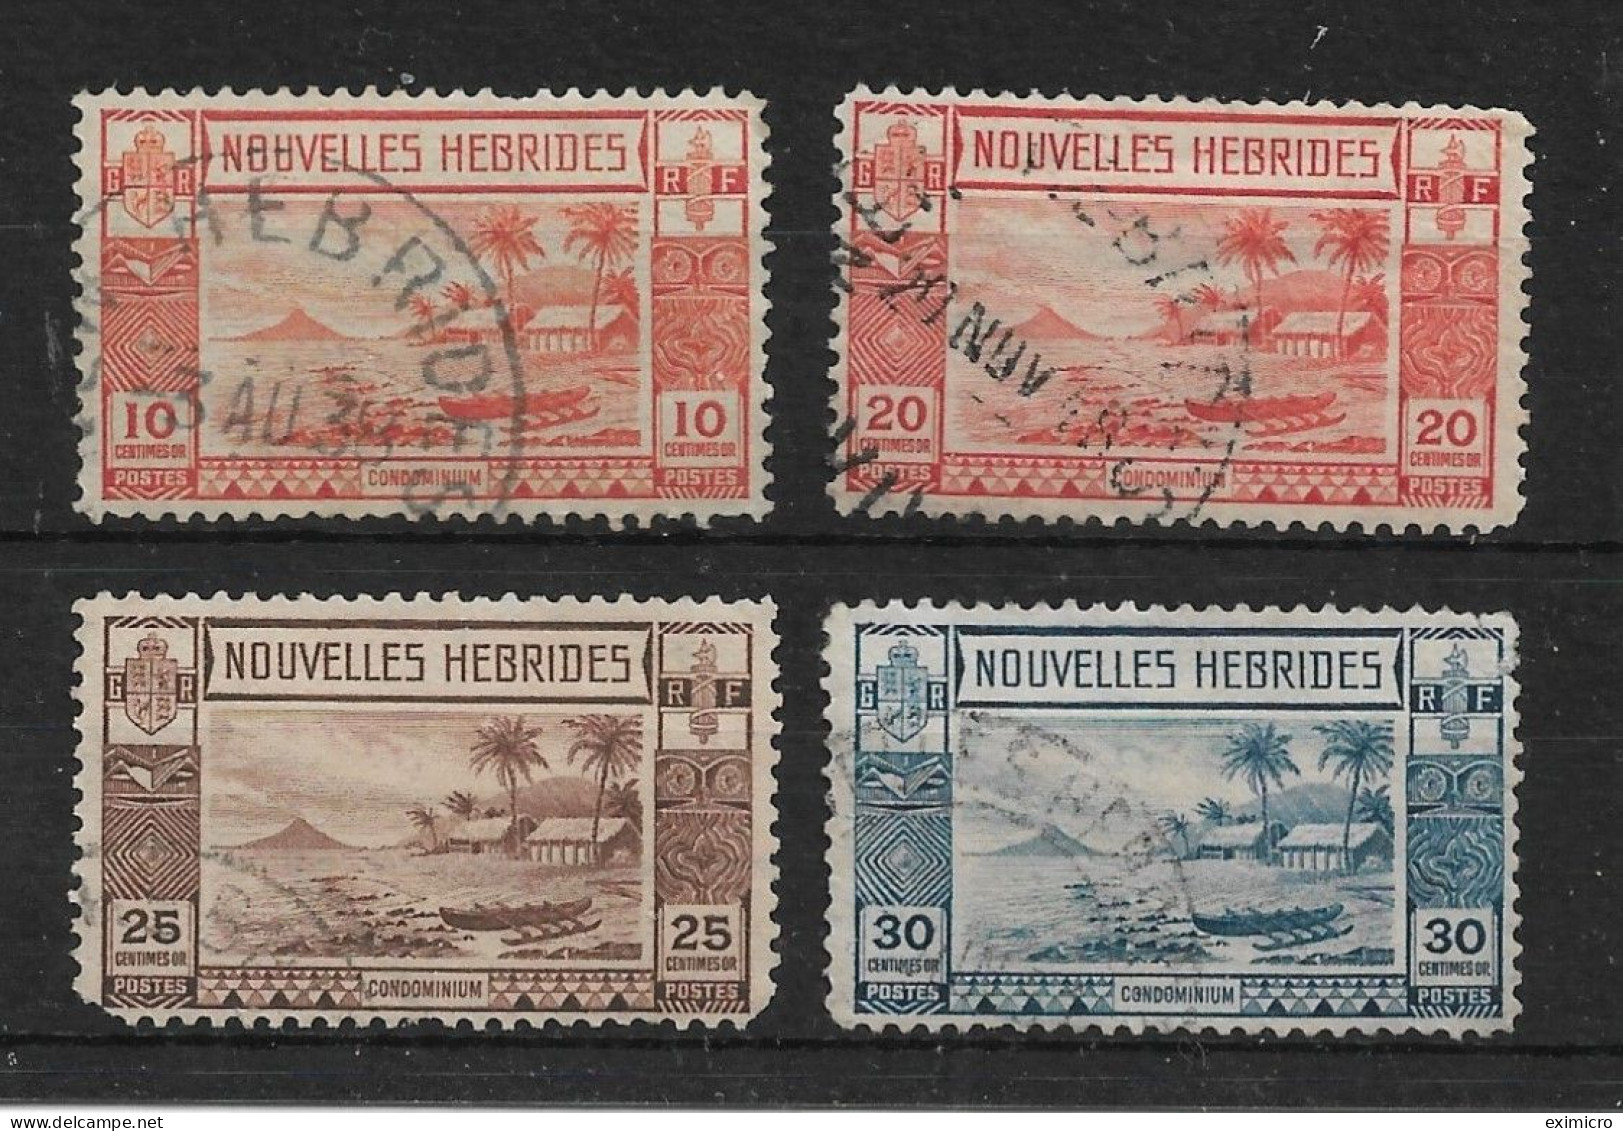 NEW HEBRIDES (FRENCH CURRENCY) 1938 10c, 20c, 25c, 30c SG F54, F56, F57, F58 FINE USED Cat £26 - Gebruikt